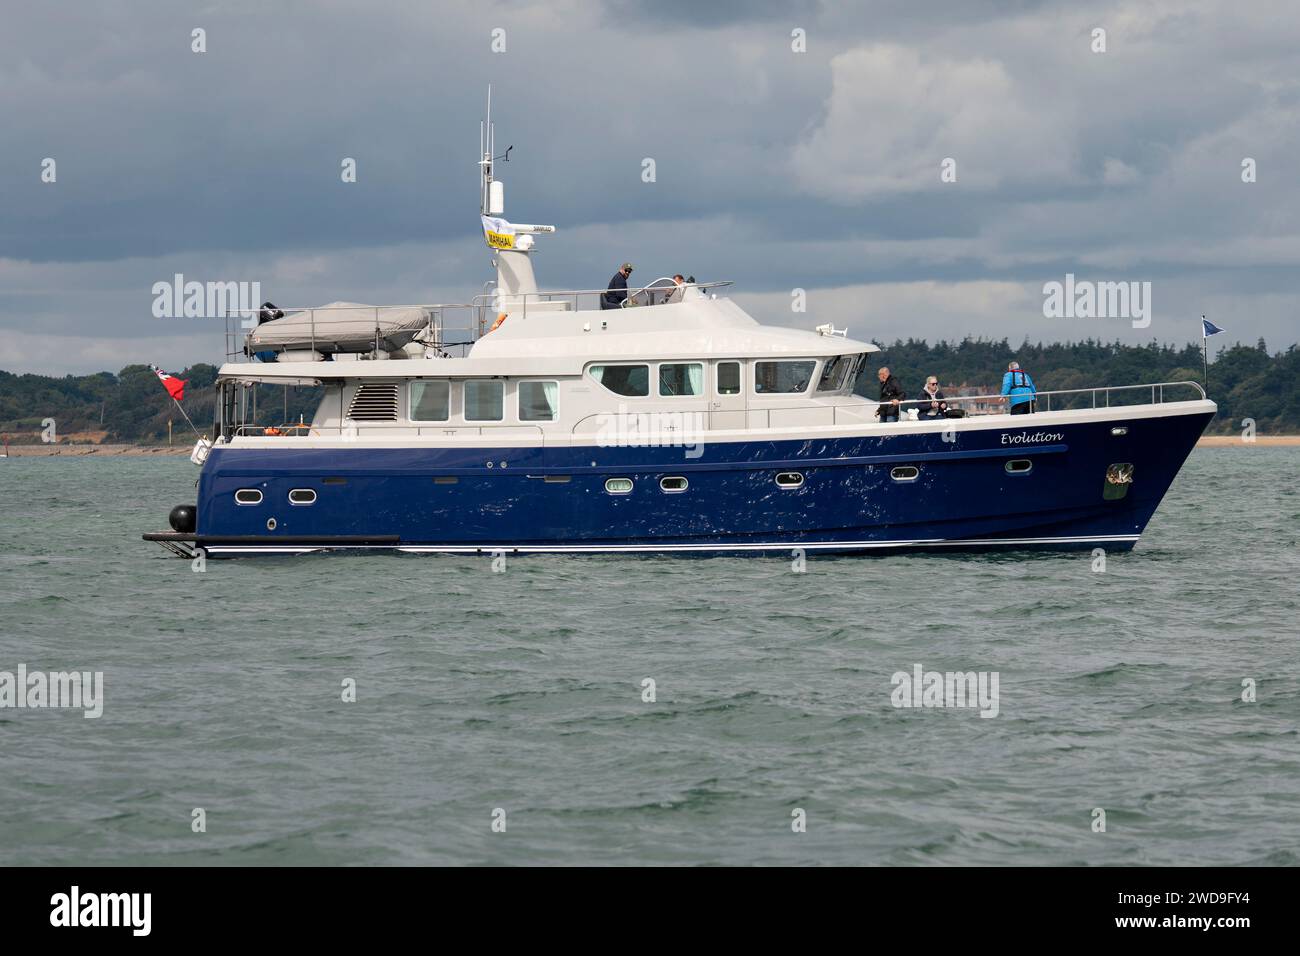 Lovely looking Hardy motor yacht, Evolution acting as a marshal boat during the Cowes Power boat race in the Solent off the South coast of England Stock Photo